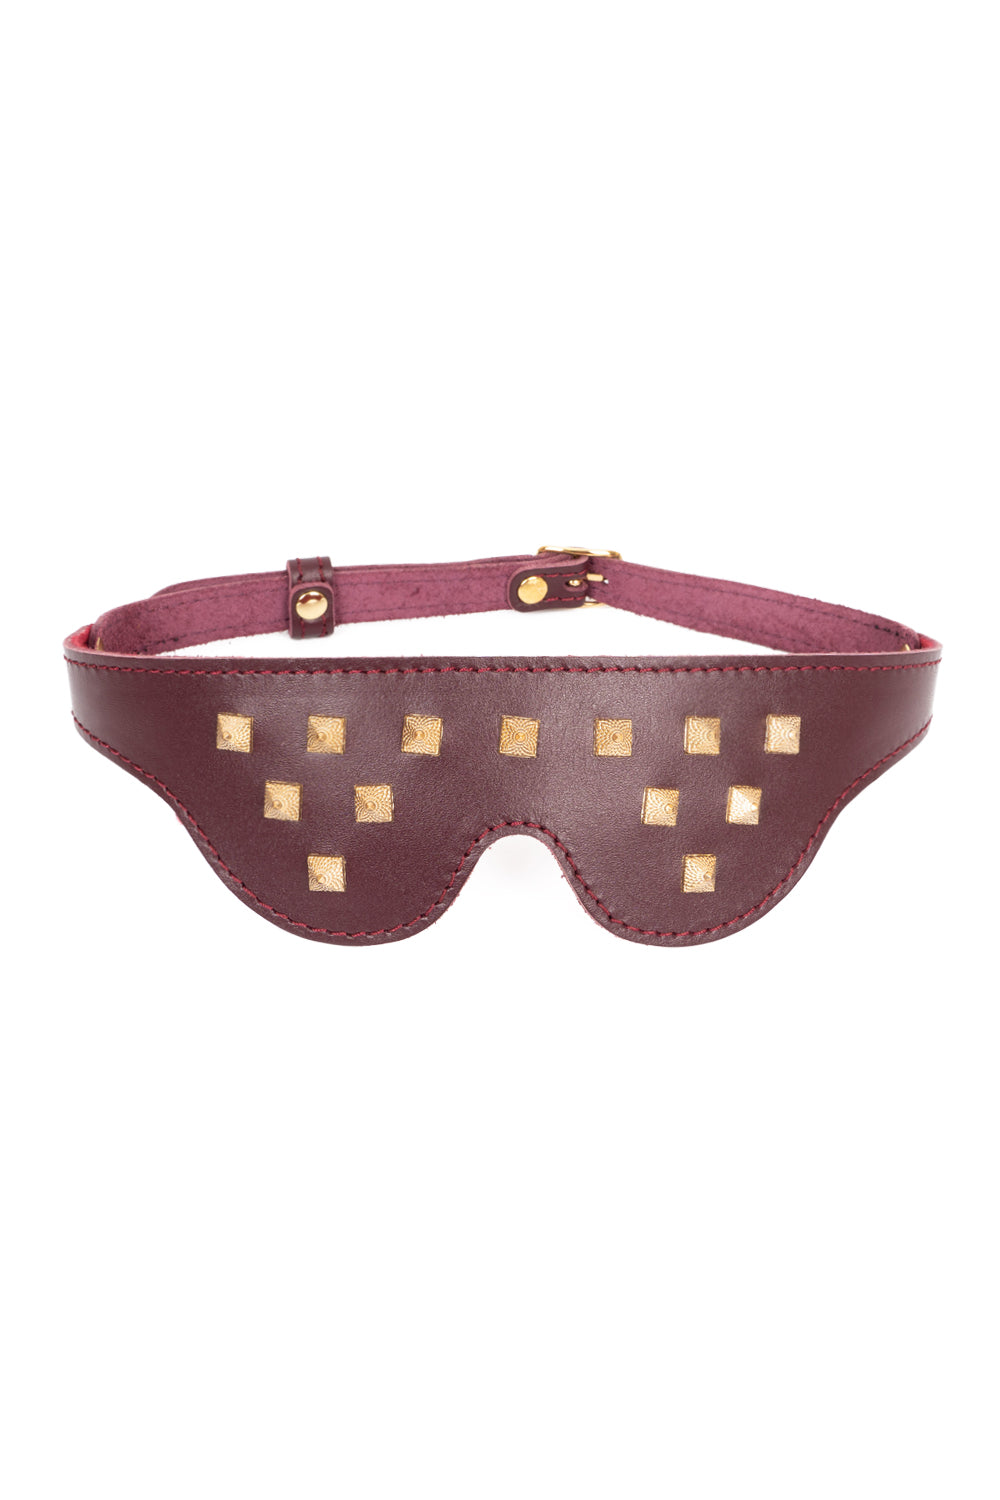 Leather Blindfold Mask with spikers. Burgundy